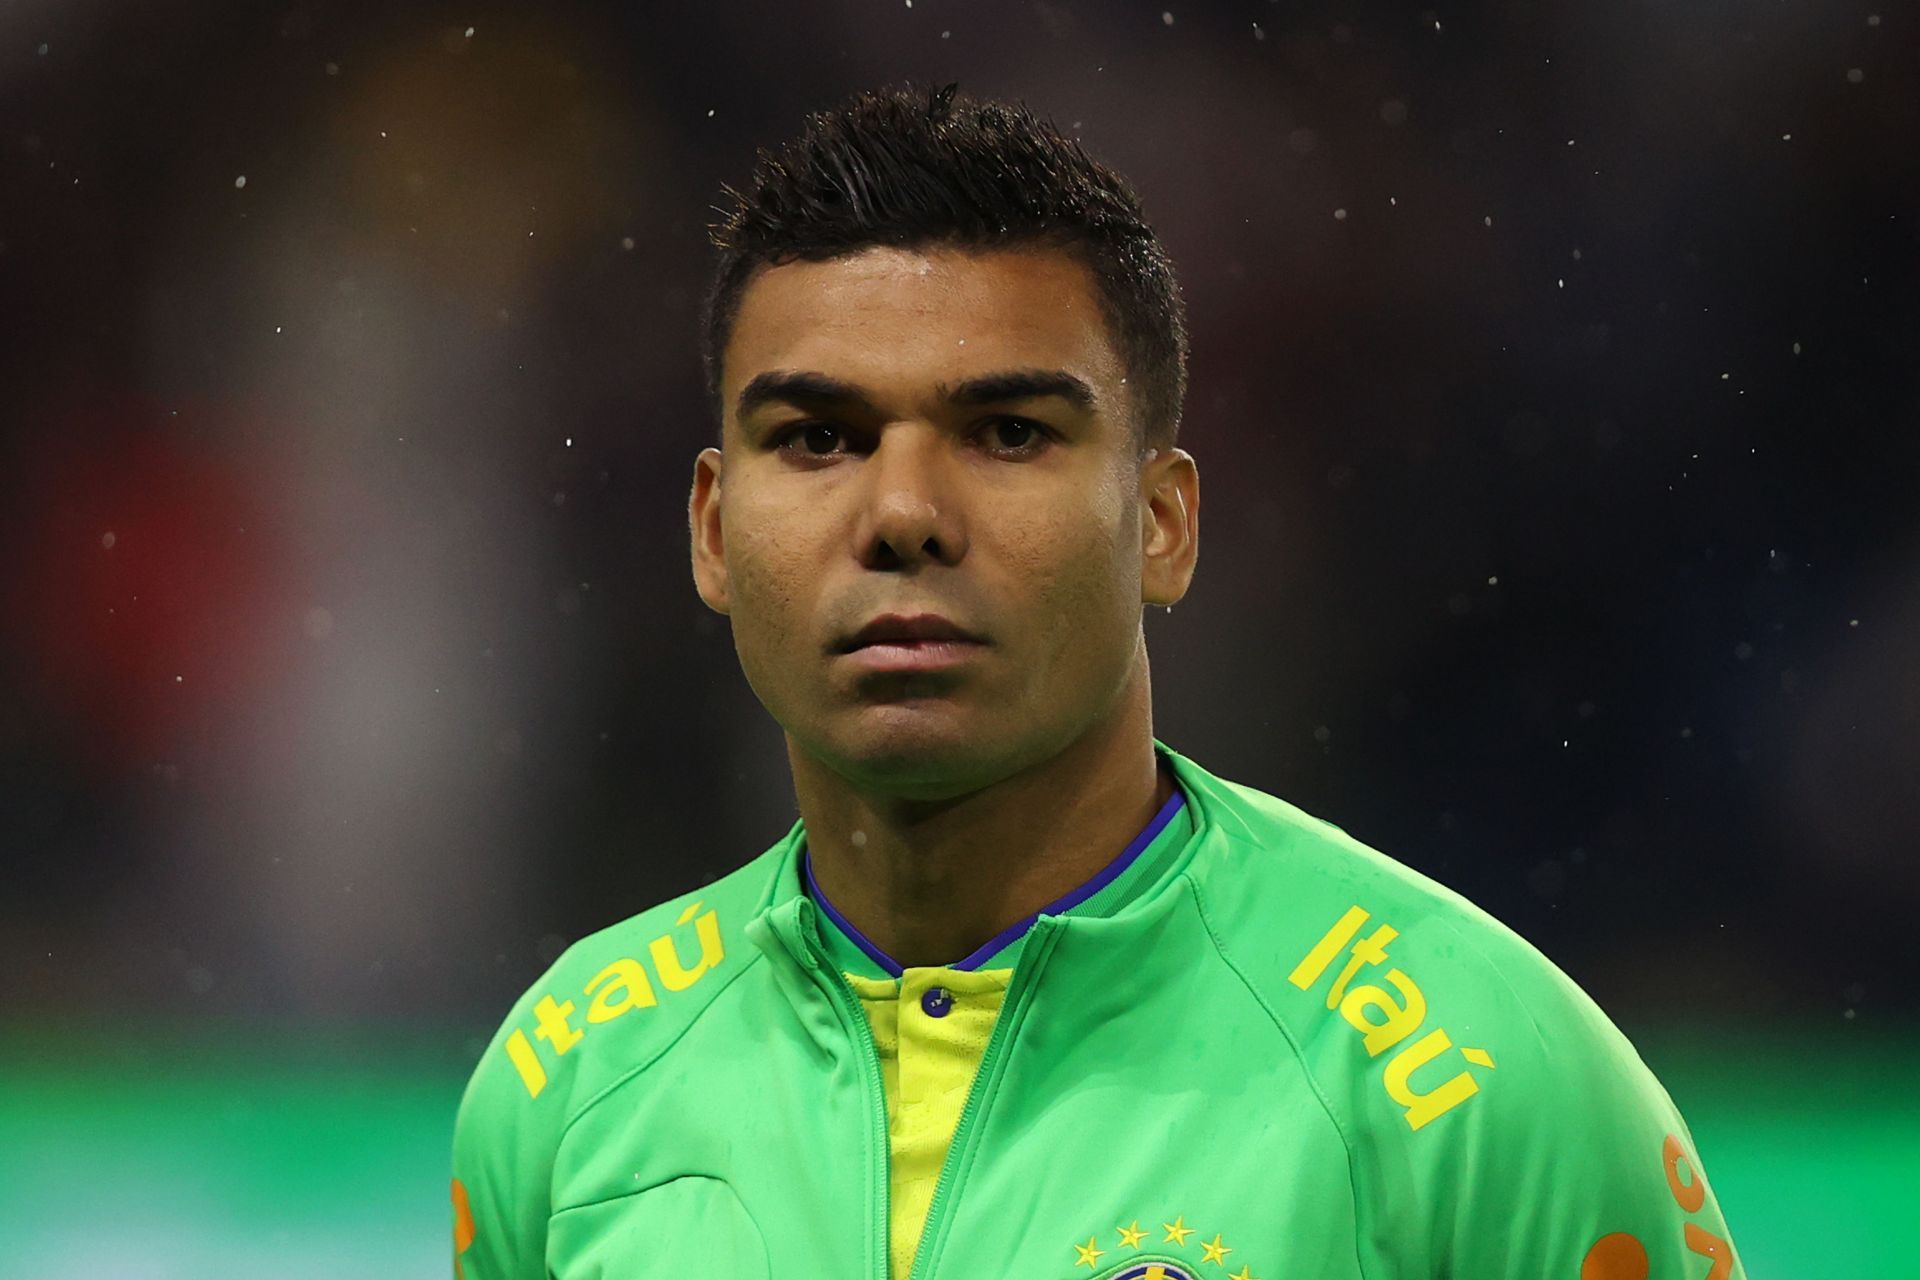 Casemiro moved to Old Trafford this summer.